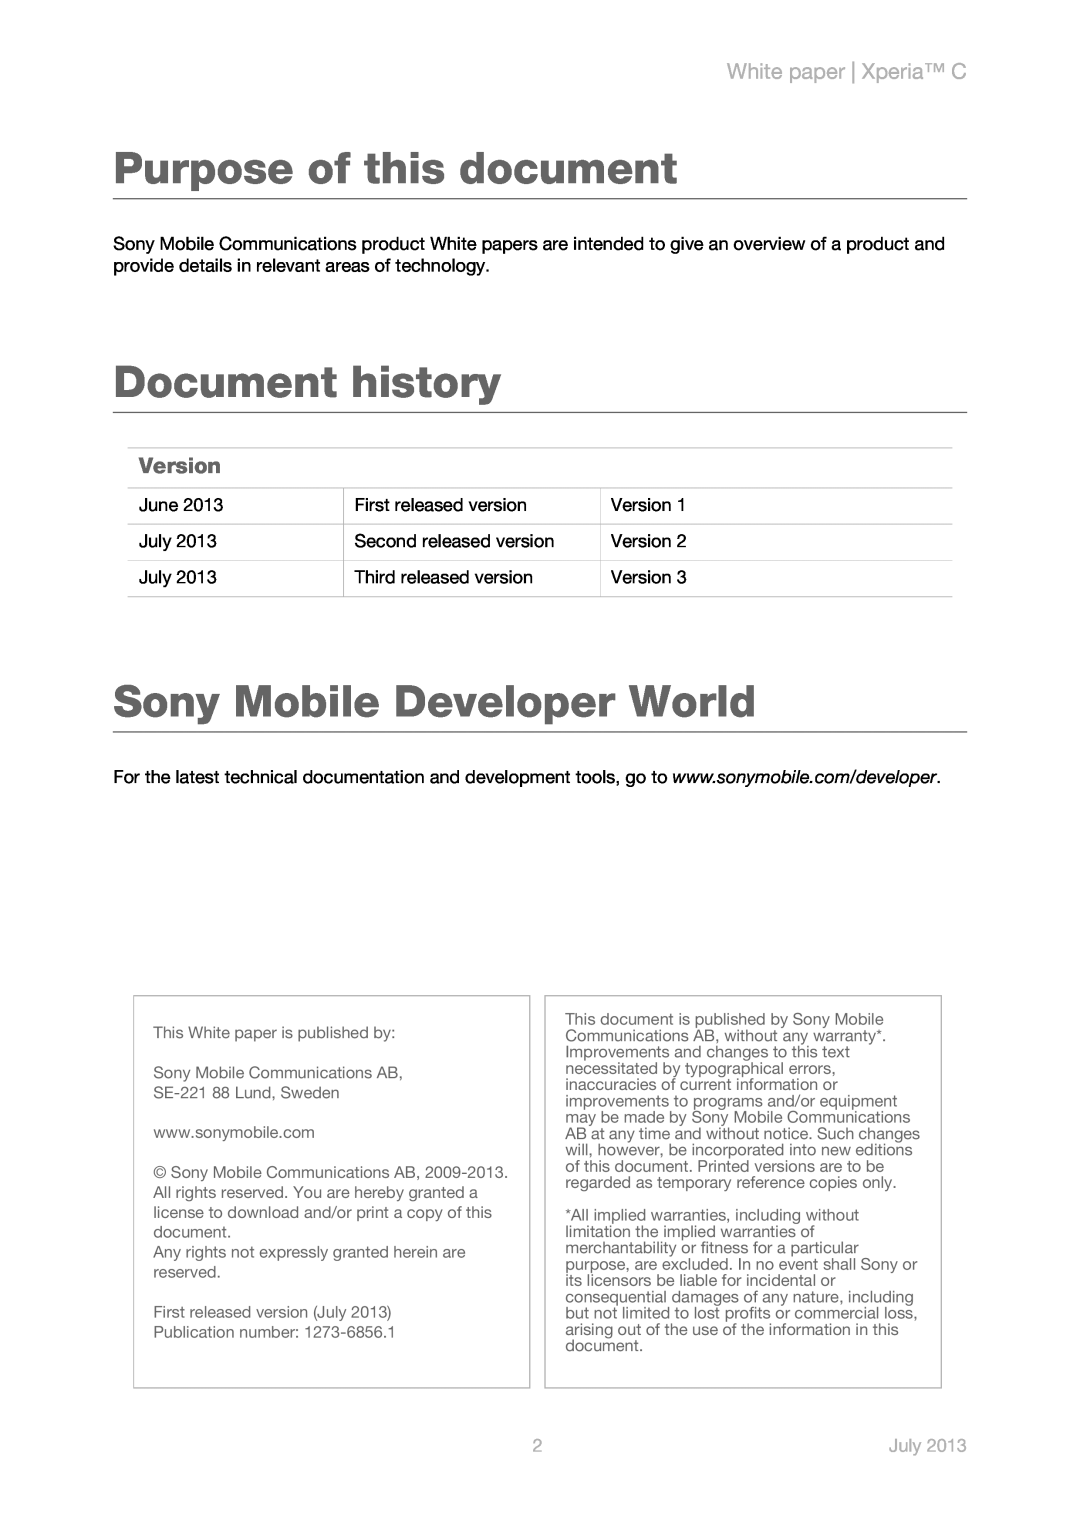 Sony s39h White paper Xperia C, Version, July, Purpose of this document, Document history, Sony Mobile Developer World 